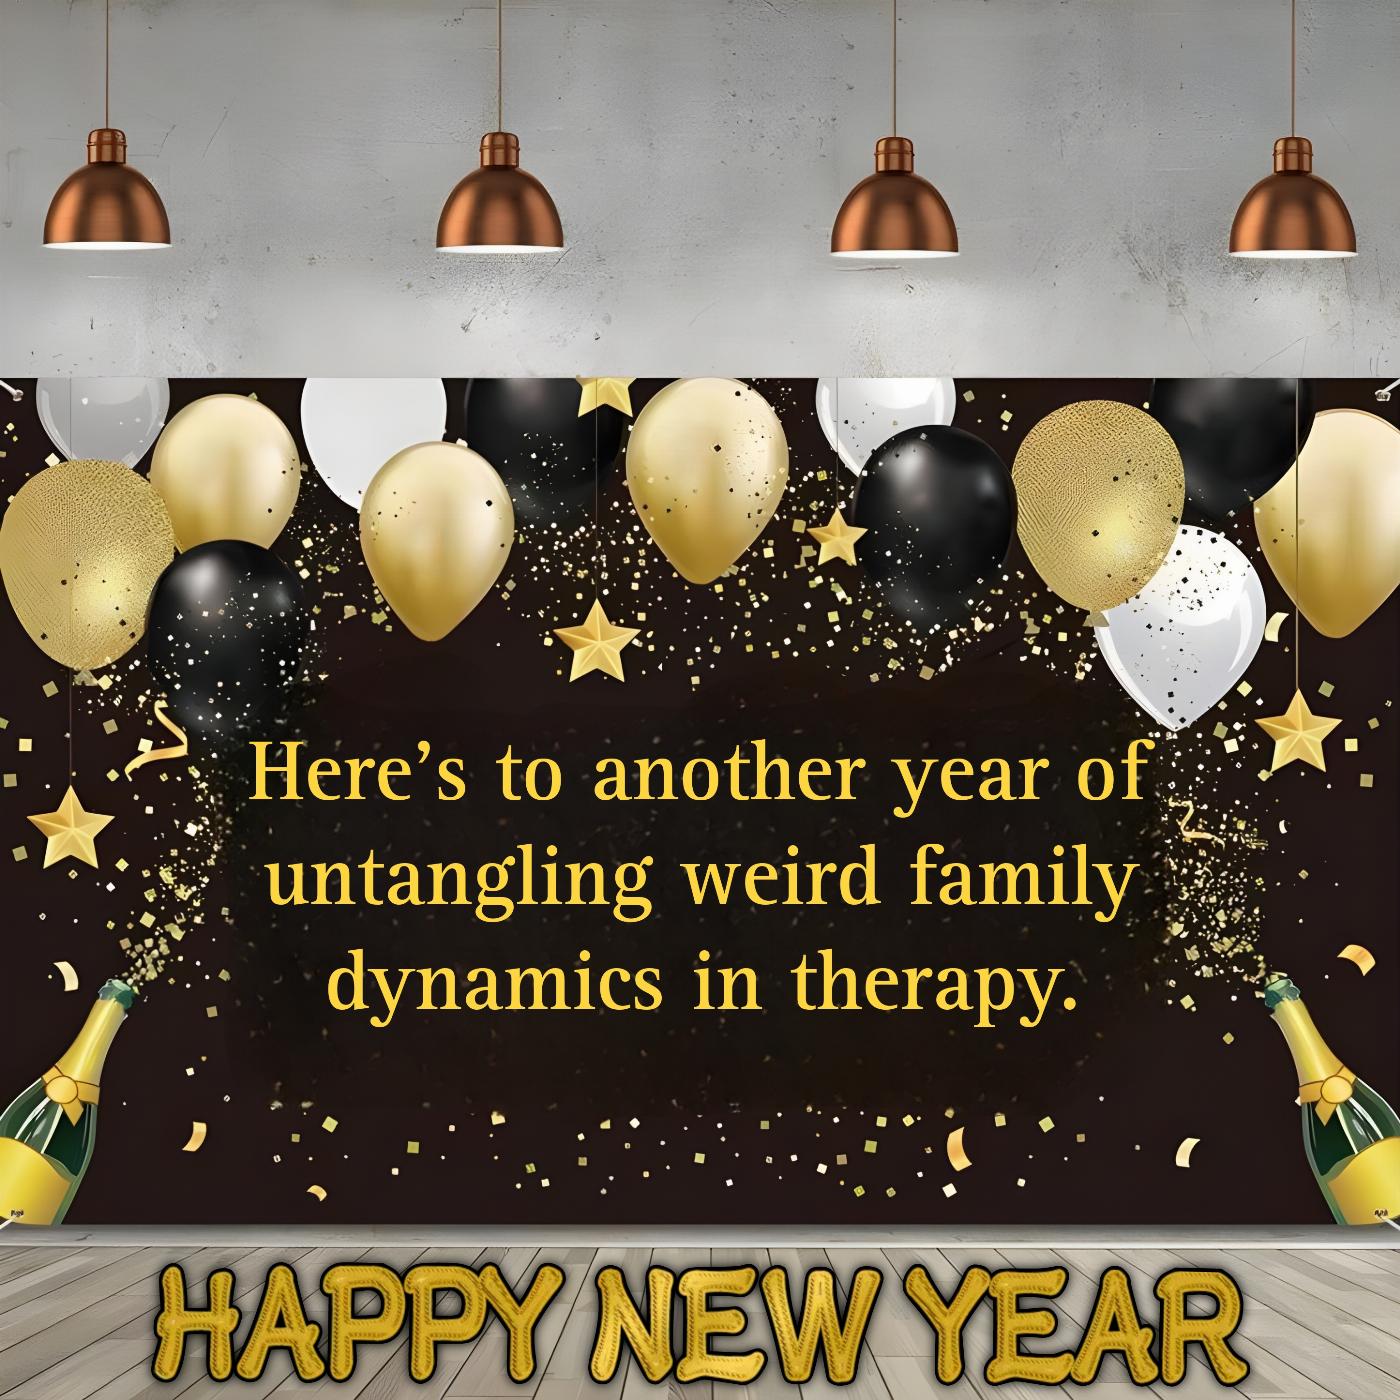 Heres to another year of untangling weird family dynamics in therapy